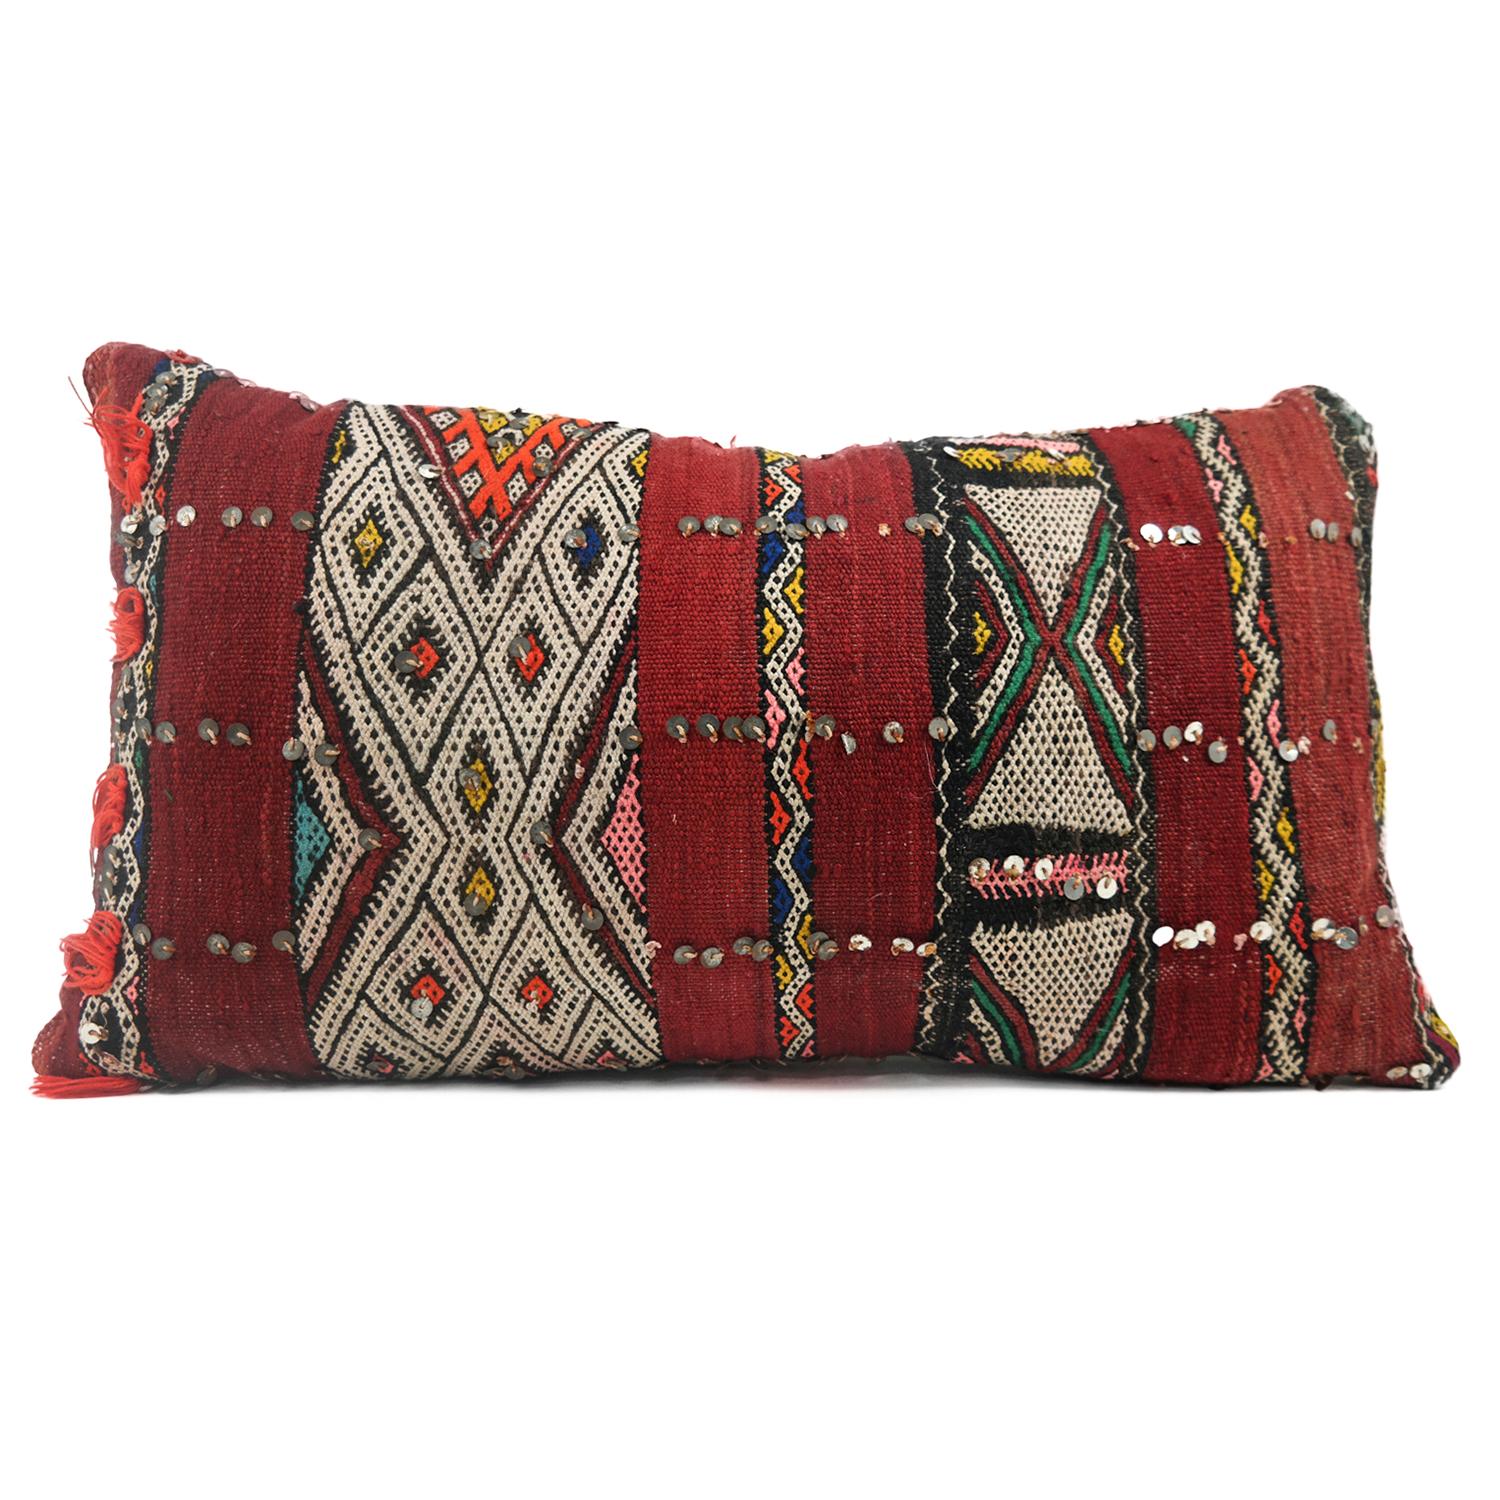 A stunning extra large Bohemian Moroccan Kilim cushion custom made in Morocco. Cut from a circa 40 years old hand loomed kilim rug, from the Middle Atlas Mountains. We have searched and selected the rug ourselves. The pillow has beautiful colors